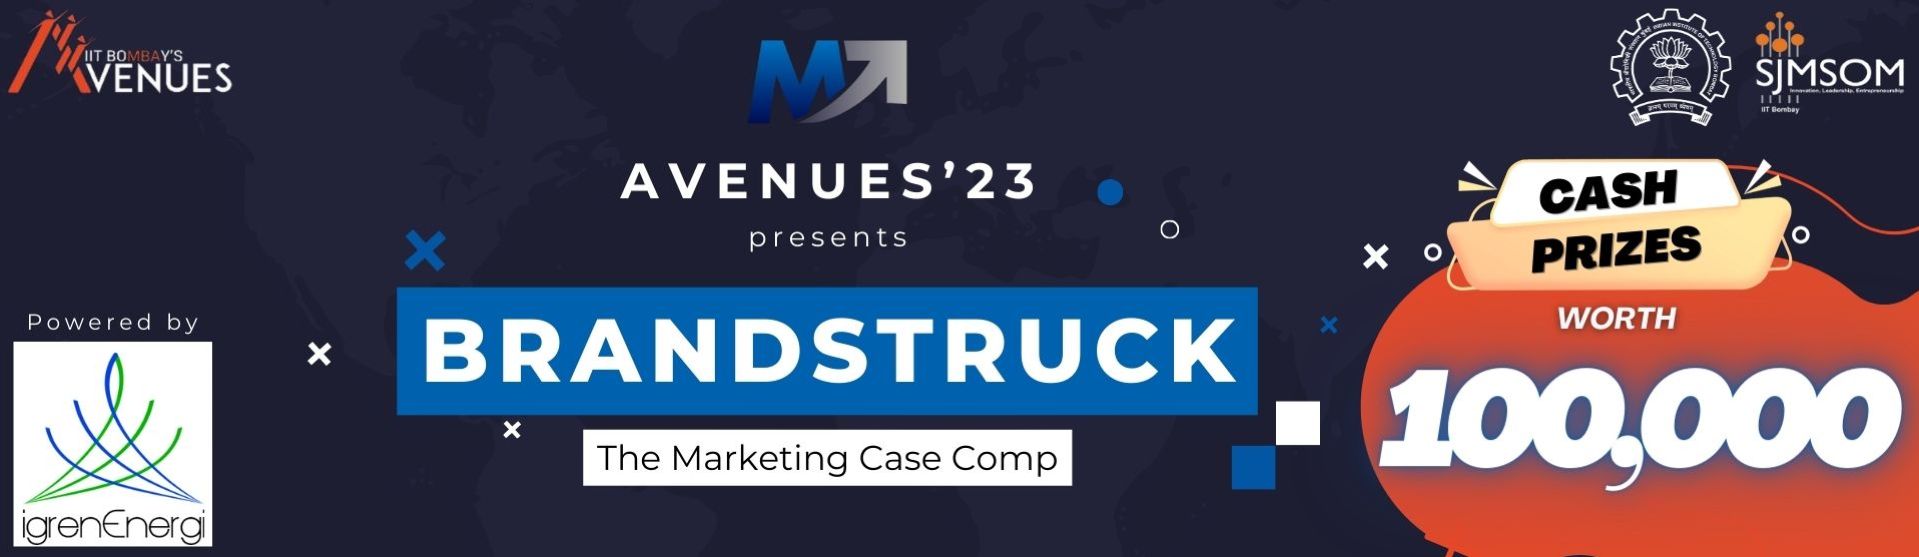 Participate in the Brandstruck - The Marketing Case Study Competition before 16 Oct 23, 12:30 AM CUT